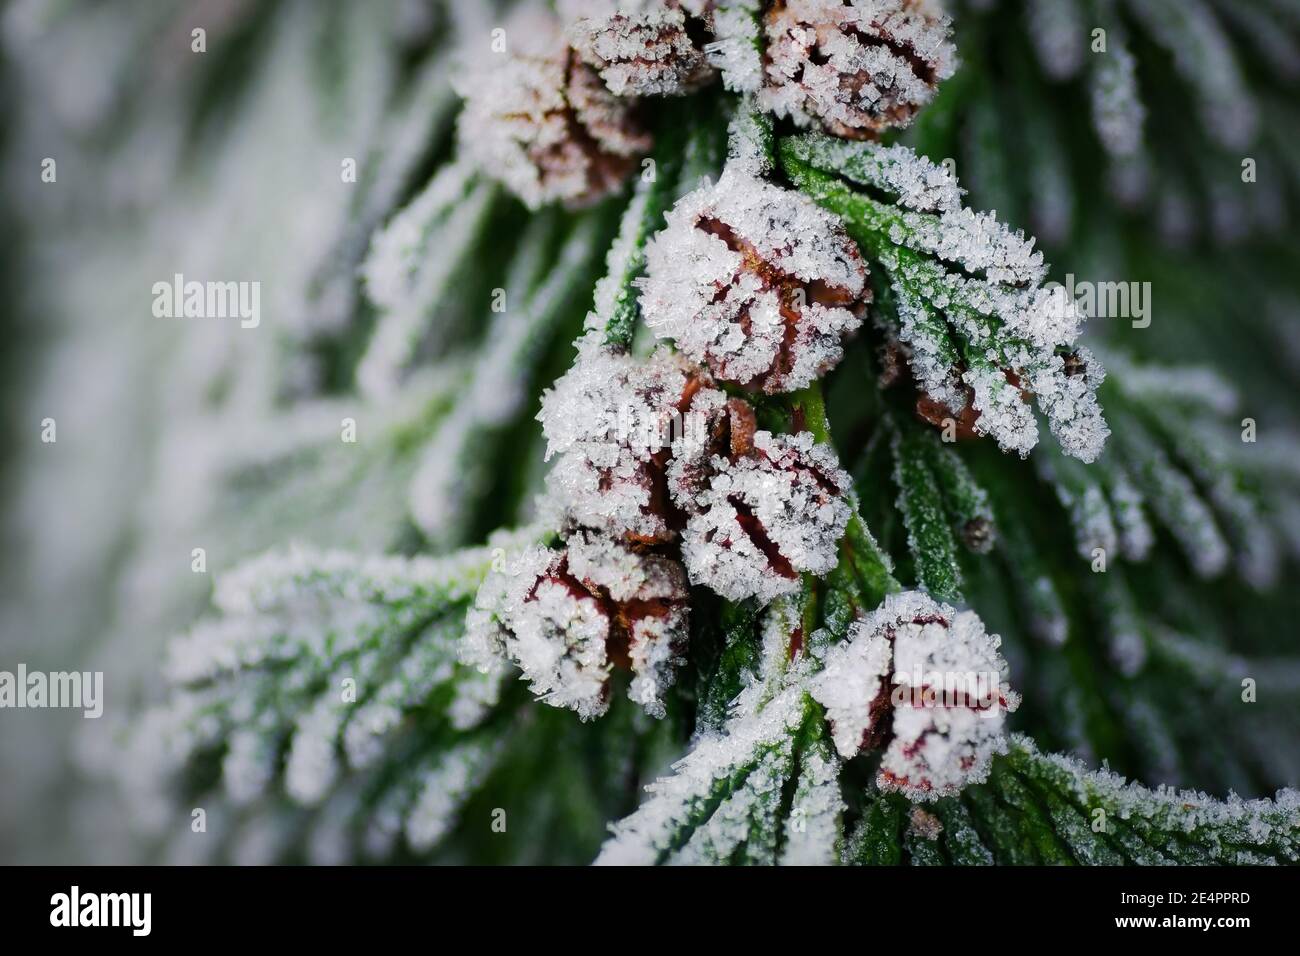 Frozen Leyland cypress cones in the garden, beautiful covered in ice crystals Stock Photo